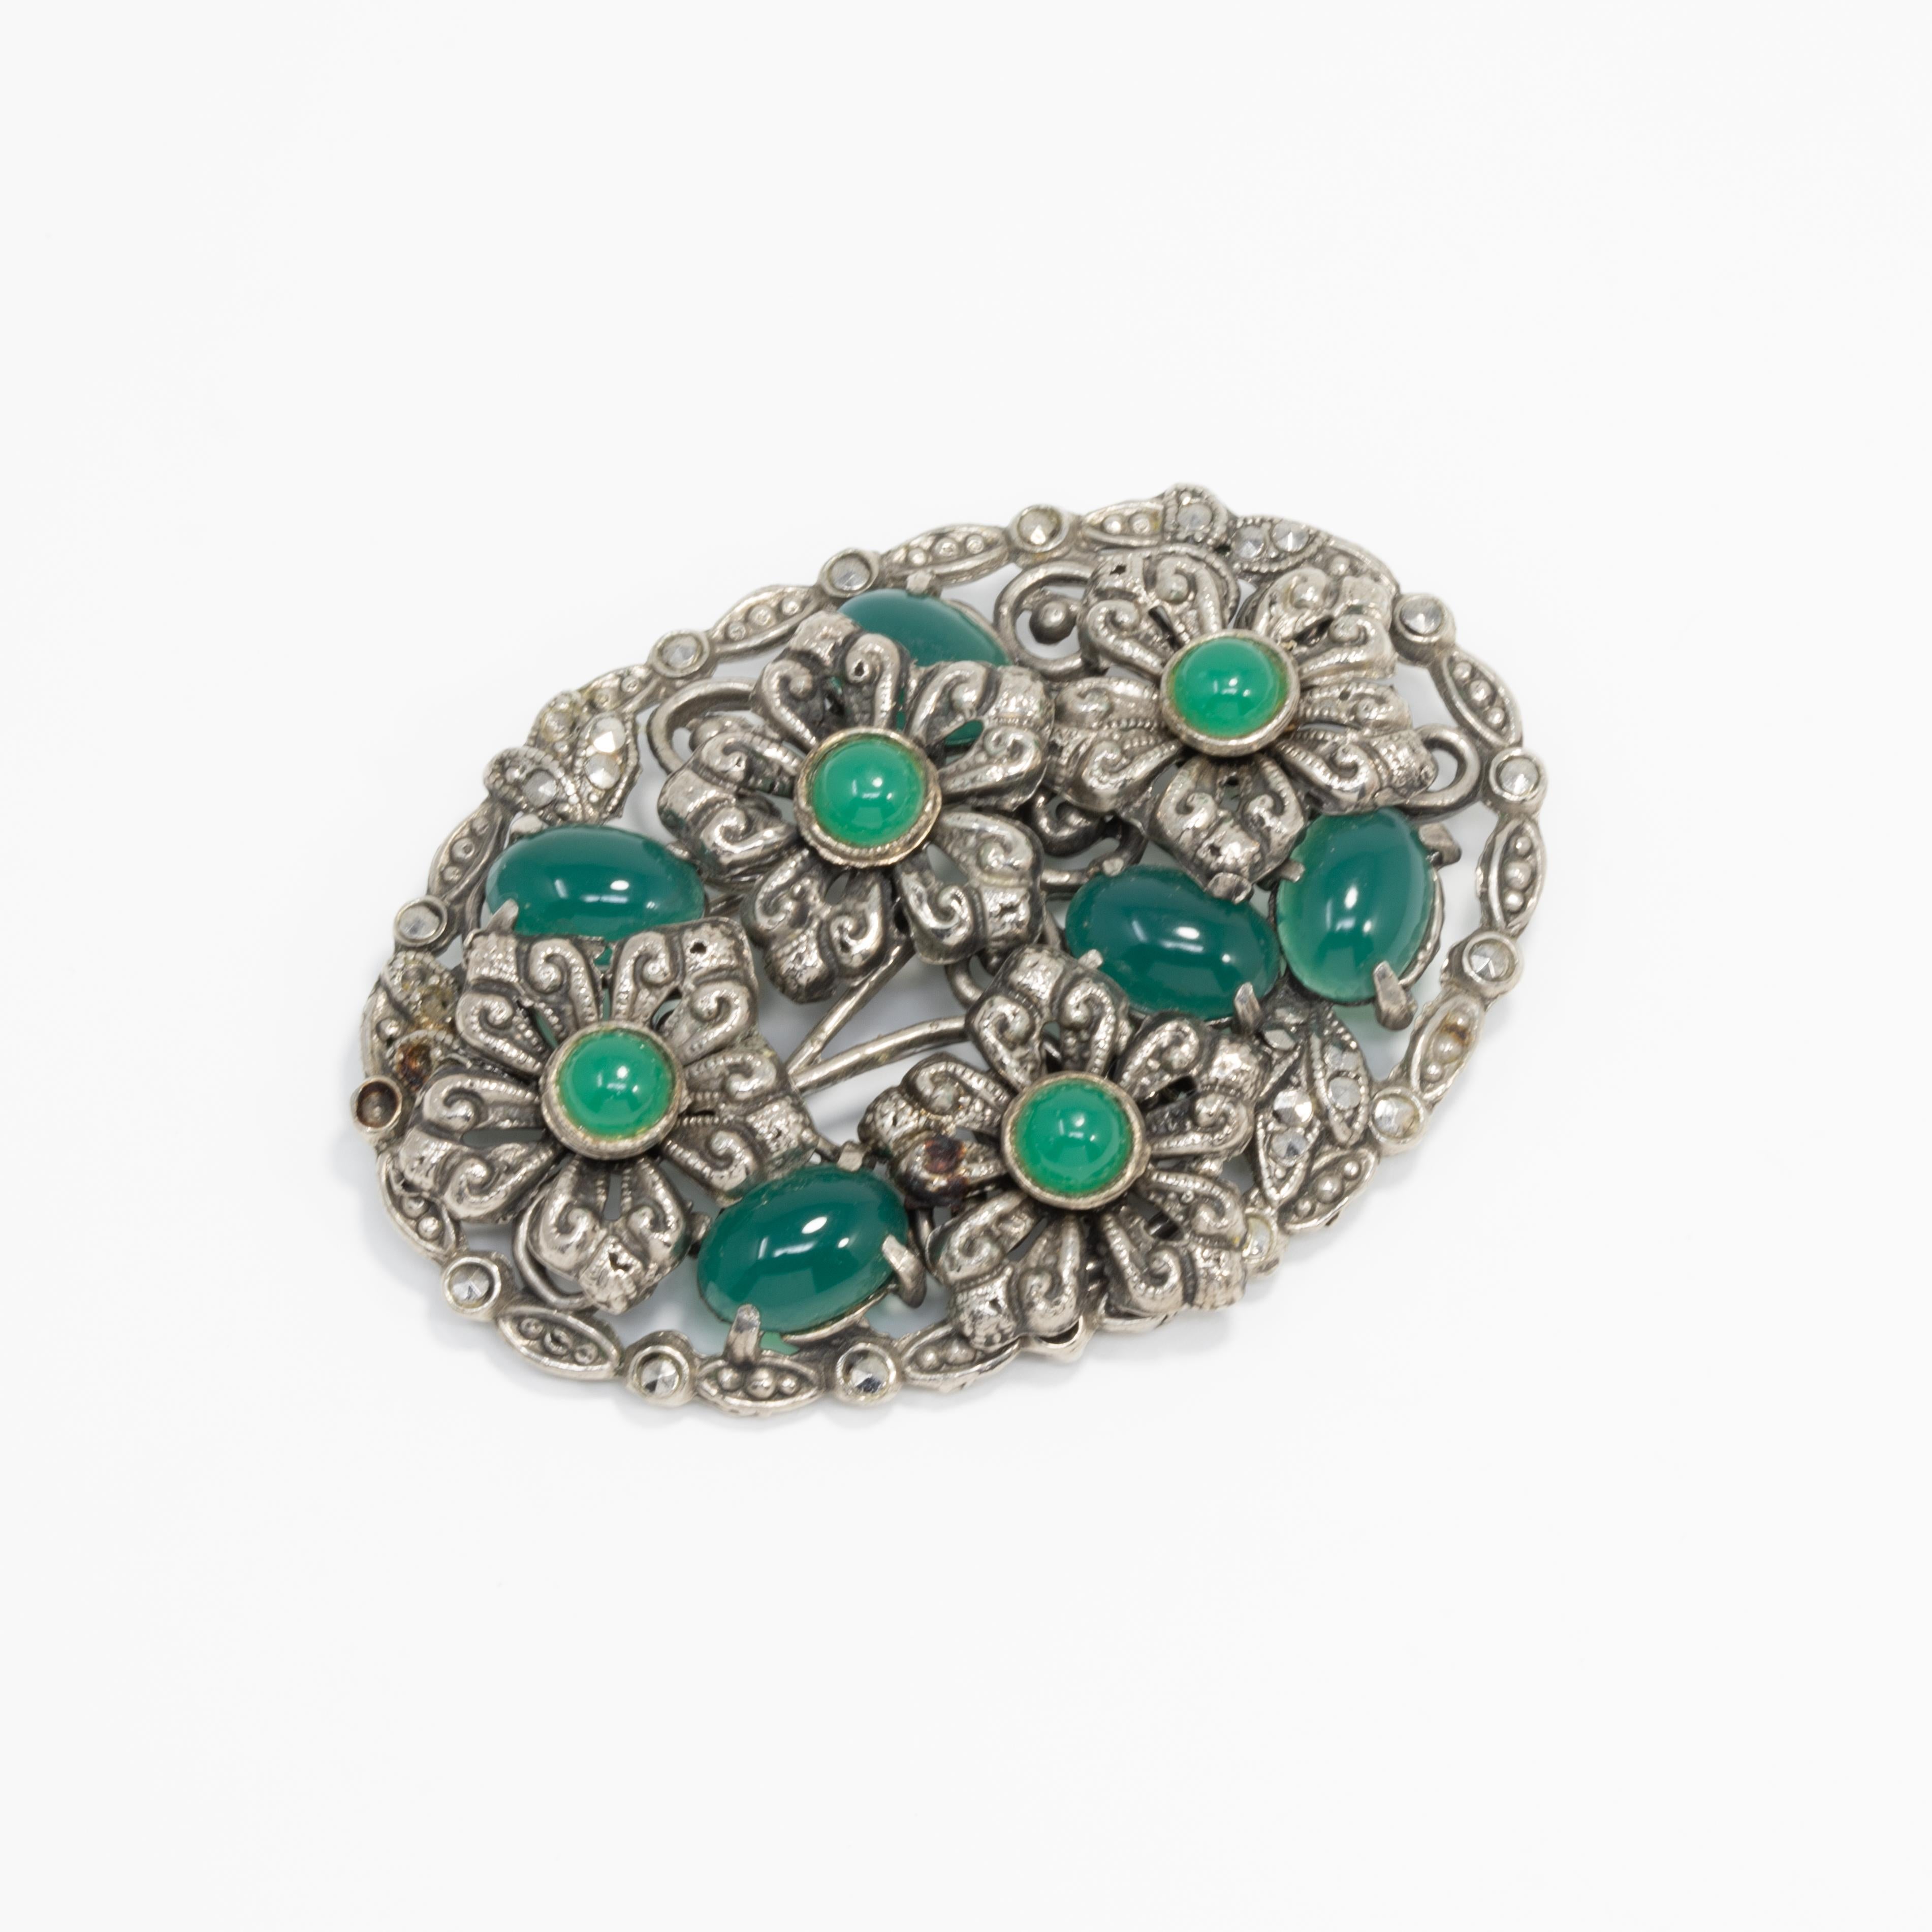 Vintage collectors' pin, featuring opaque emerald-colored cabochons set in an flower-decorated oval pin brooch. Silver-tone.

Dated early 1900s based on pin rollover mechanism.